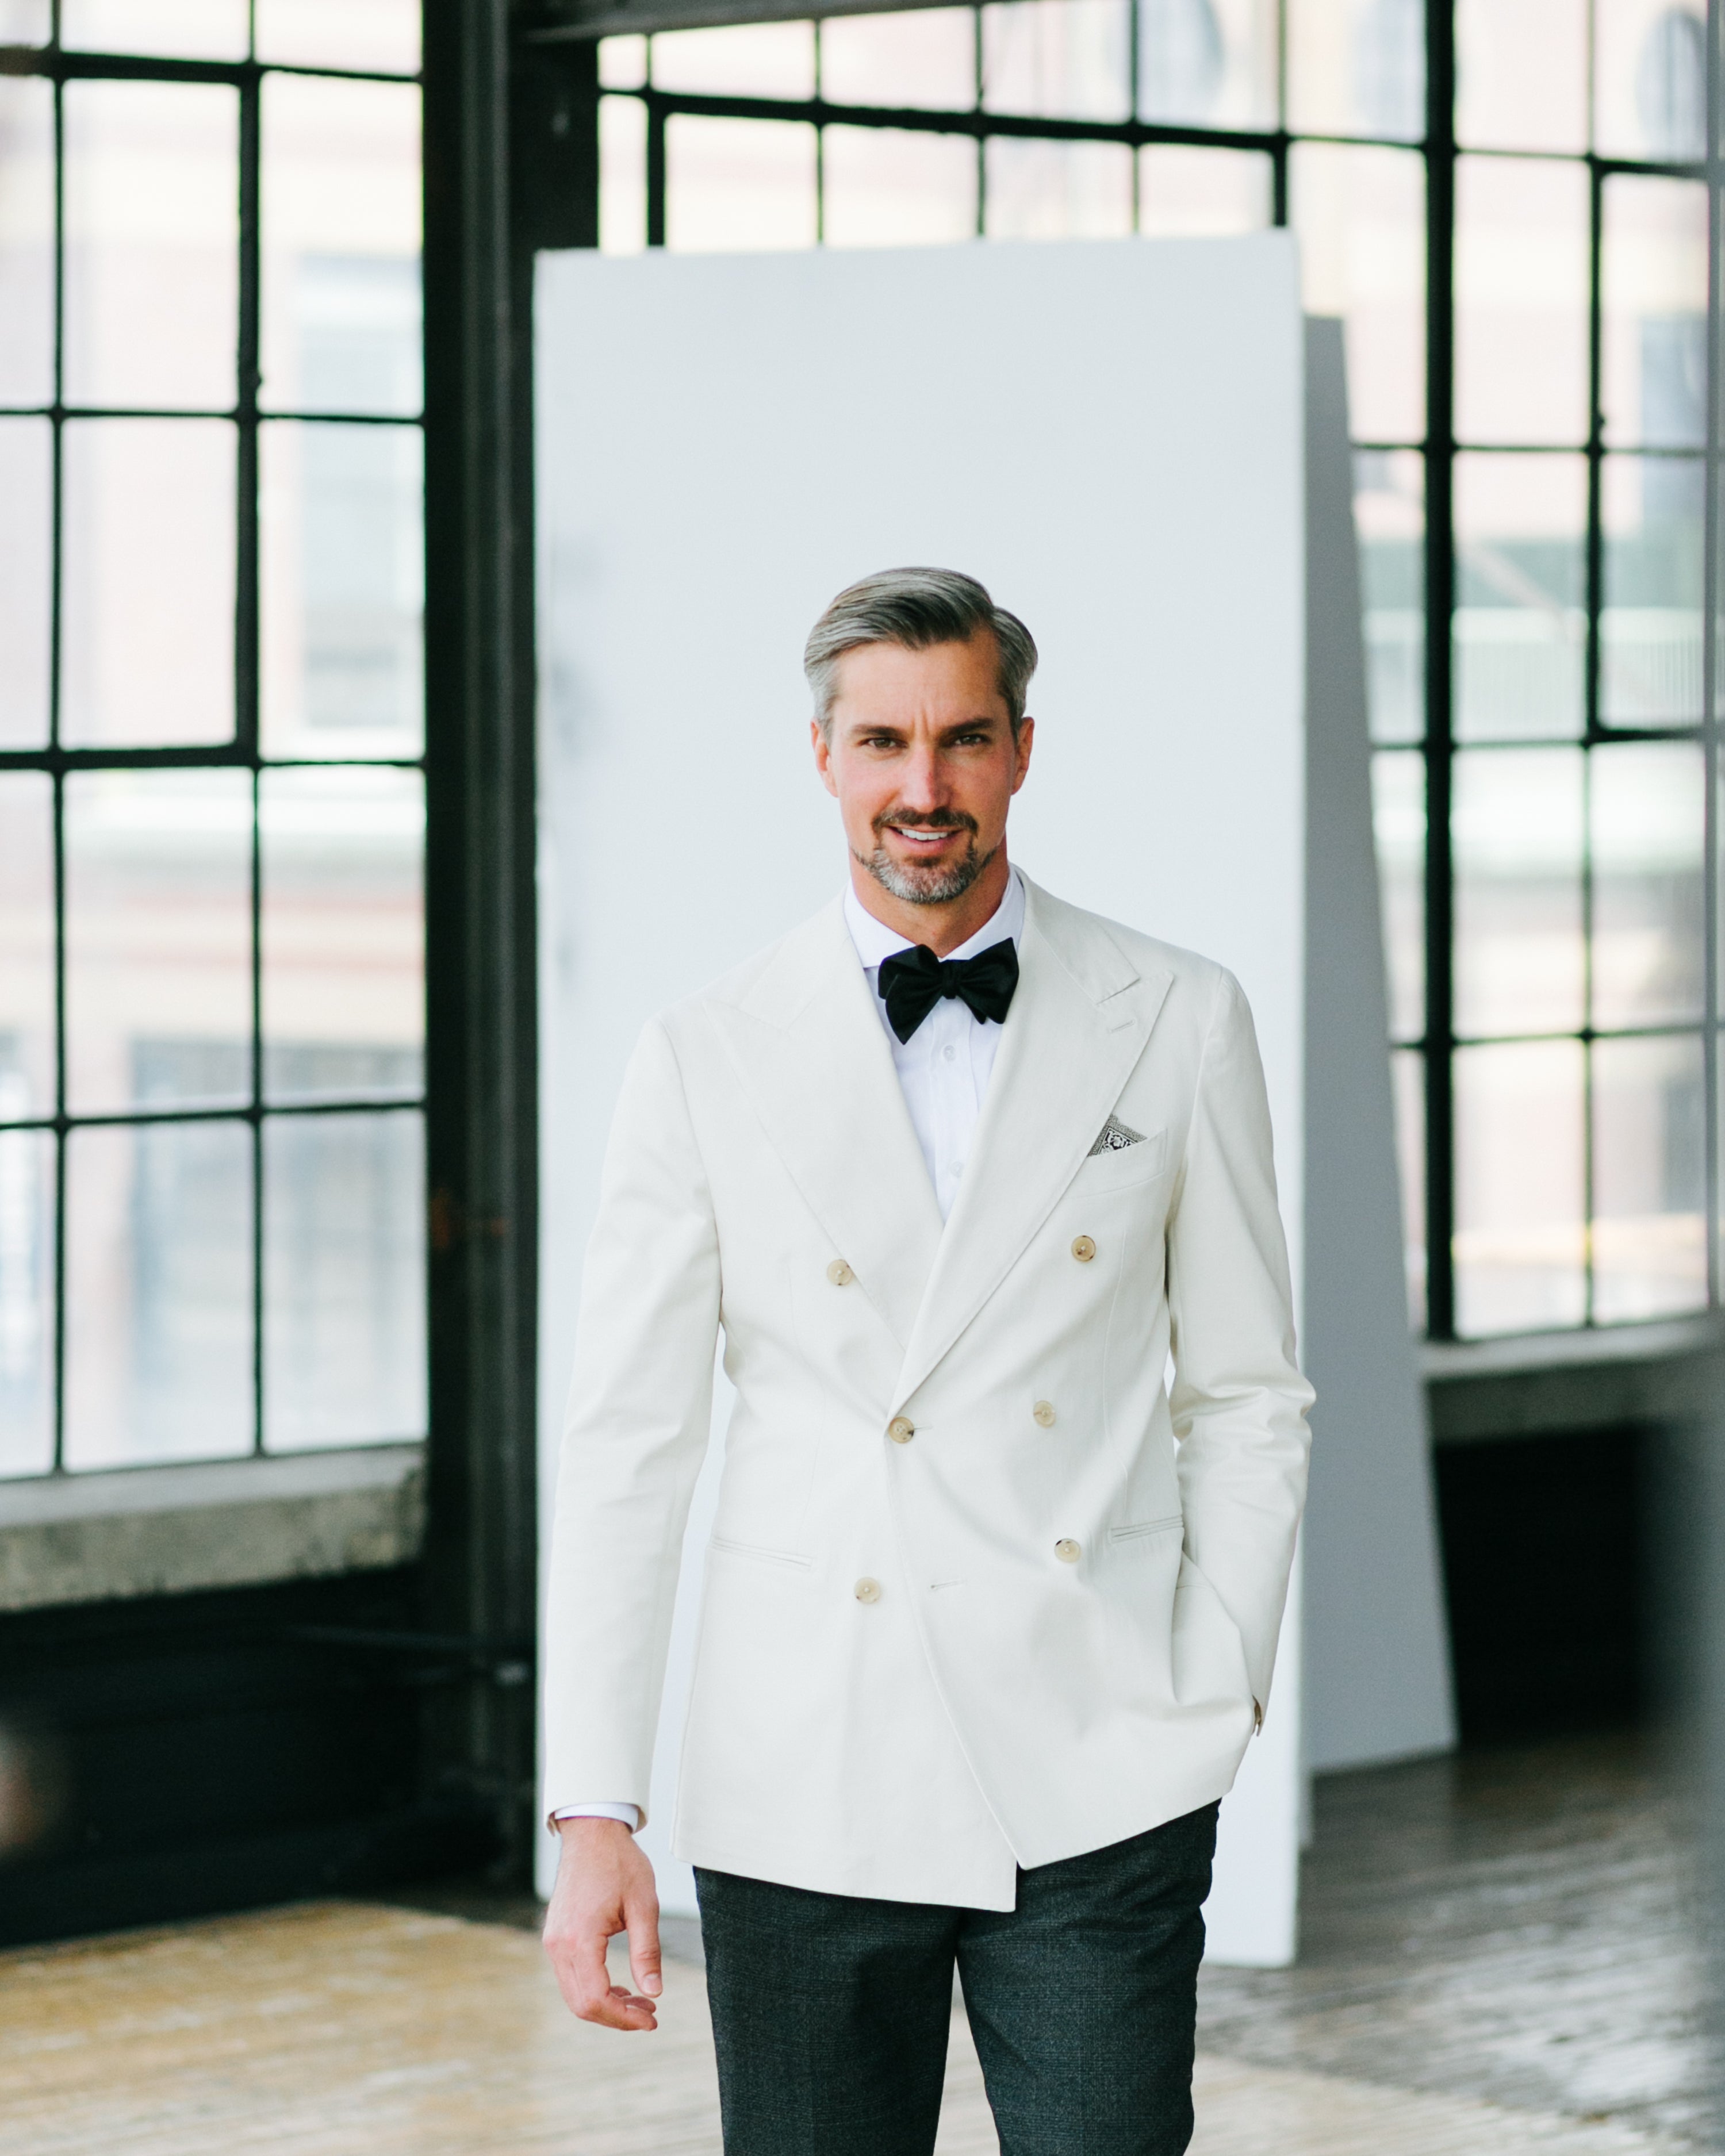 Off White Double-Breasted Dinner Jacket – Mr. Cavaliere